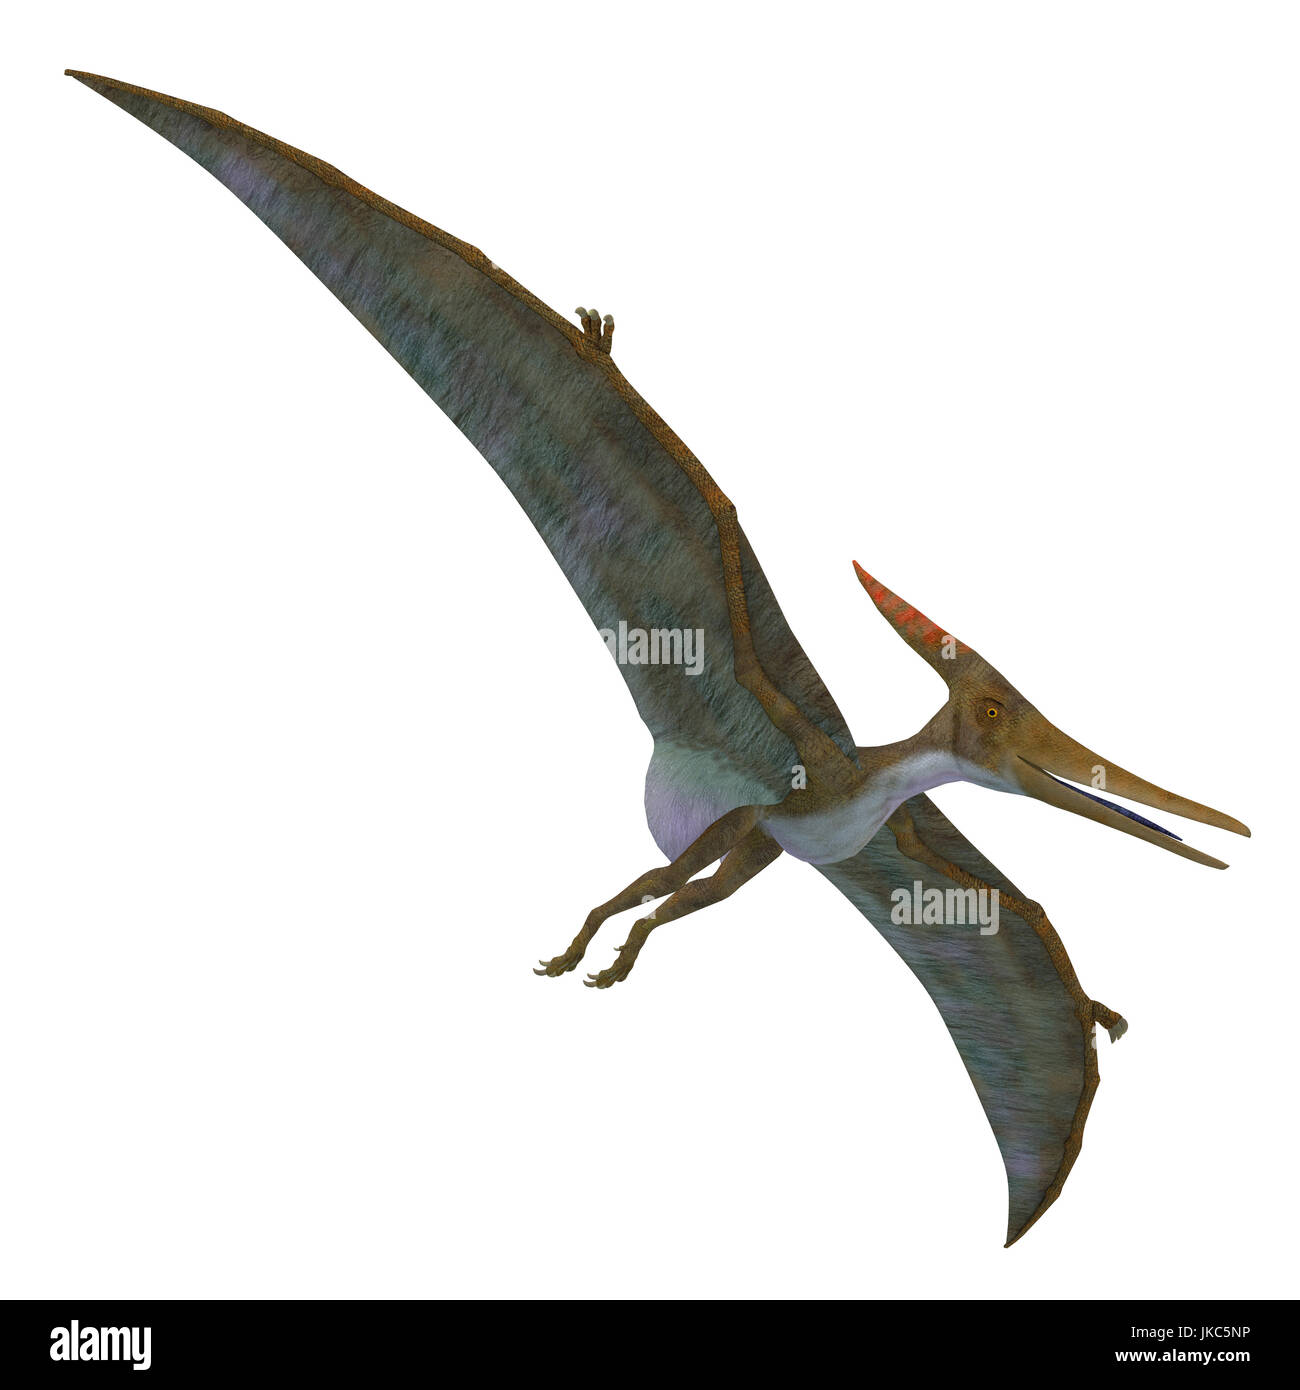 Pteranodon Reptile Soaring - Pteranodon was a flying carnivorous reptile that lived in North America in the Cretaceous Period. Stock Photo